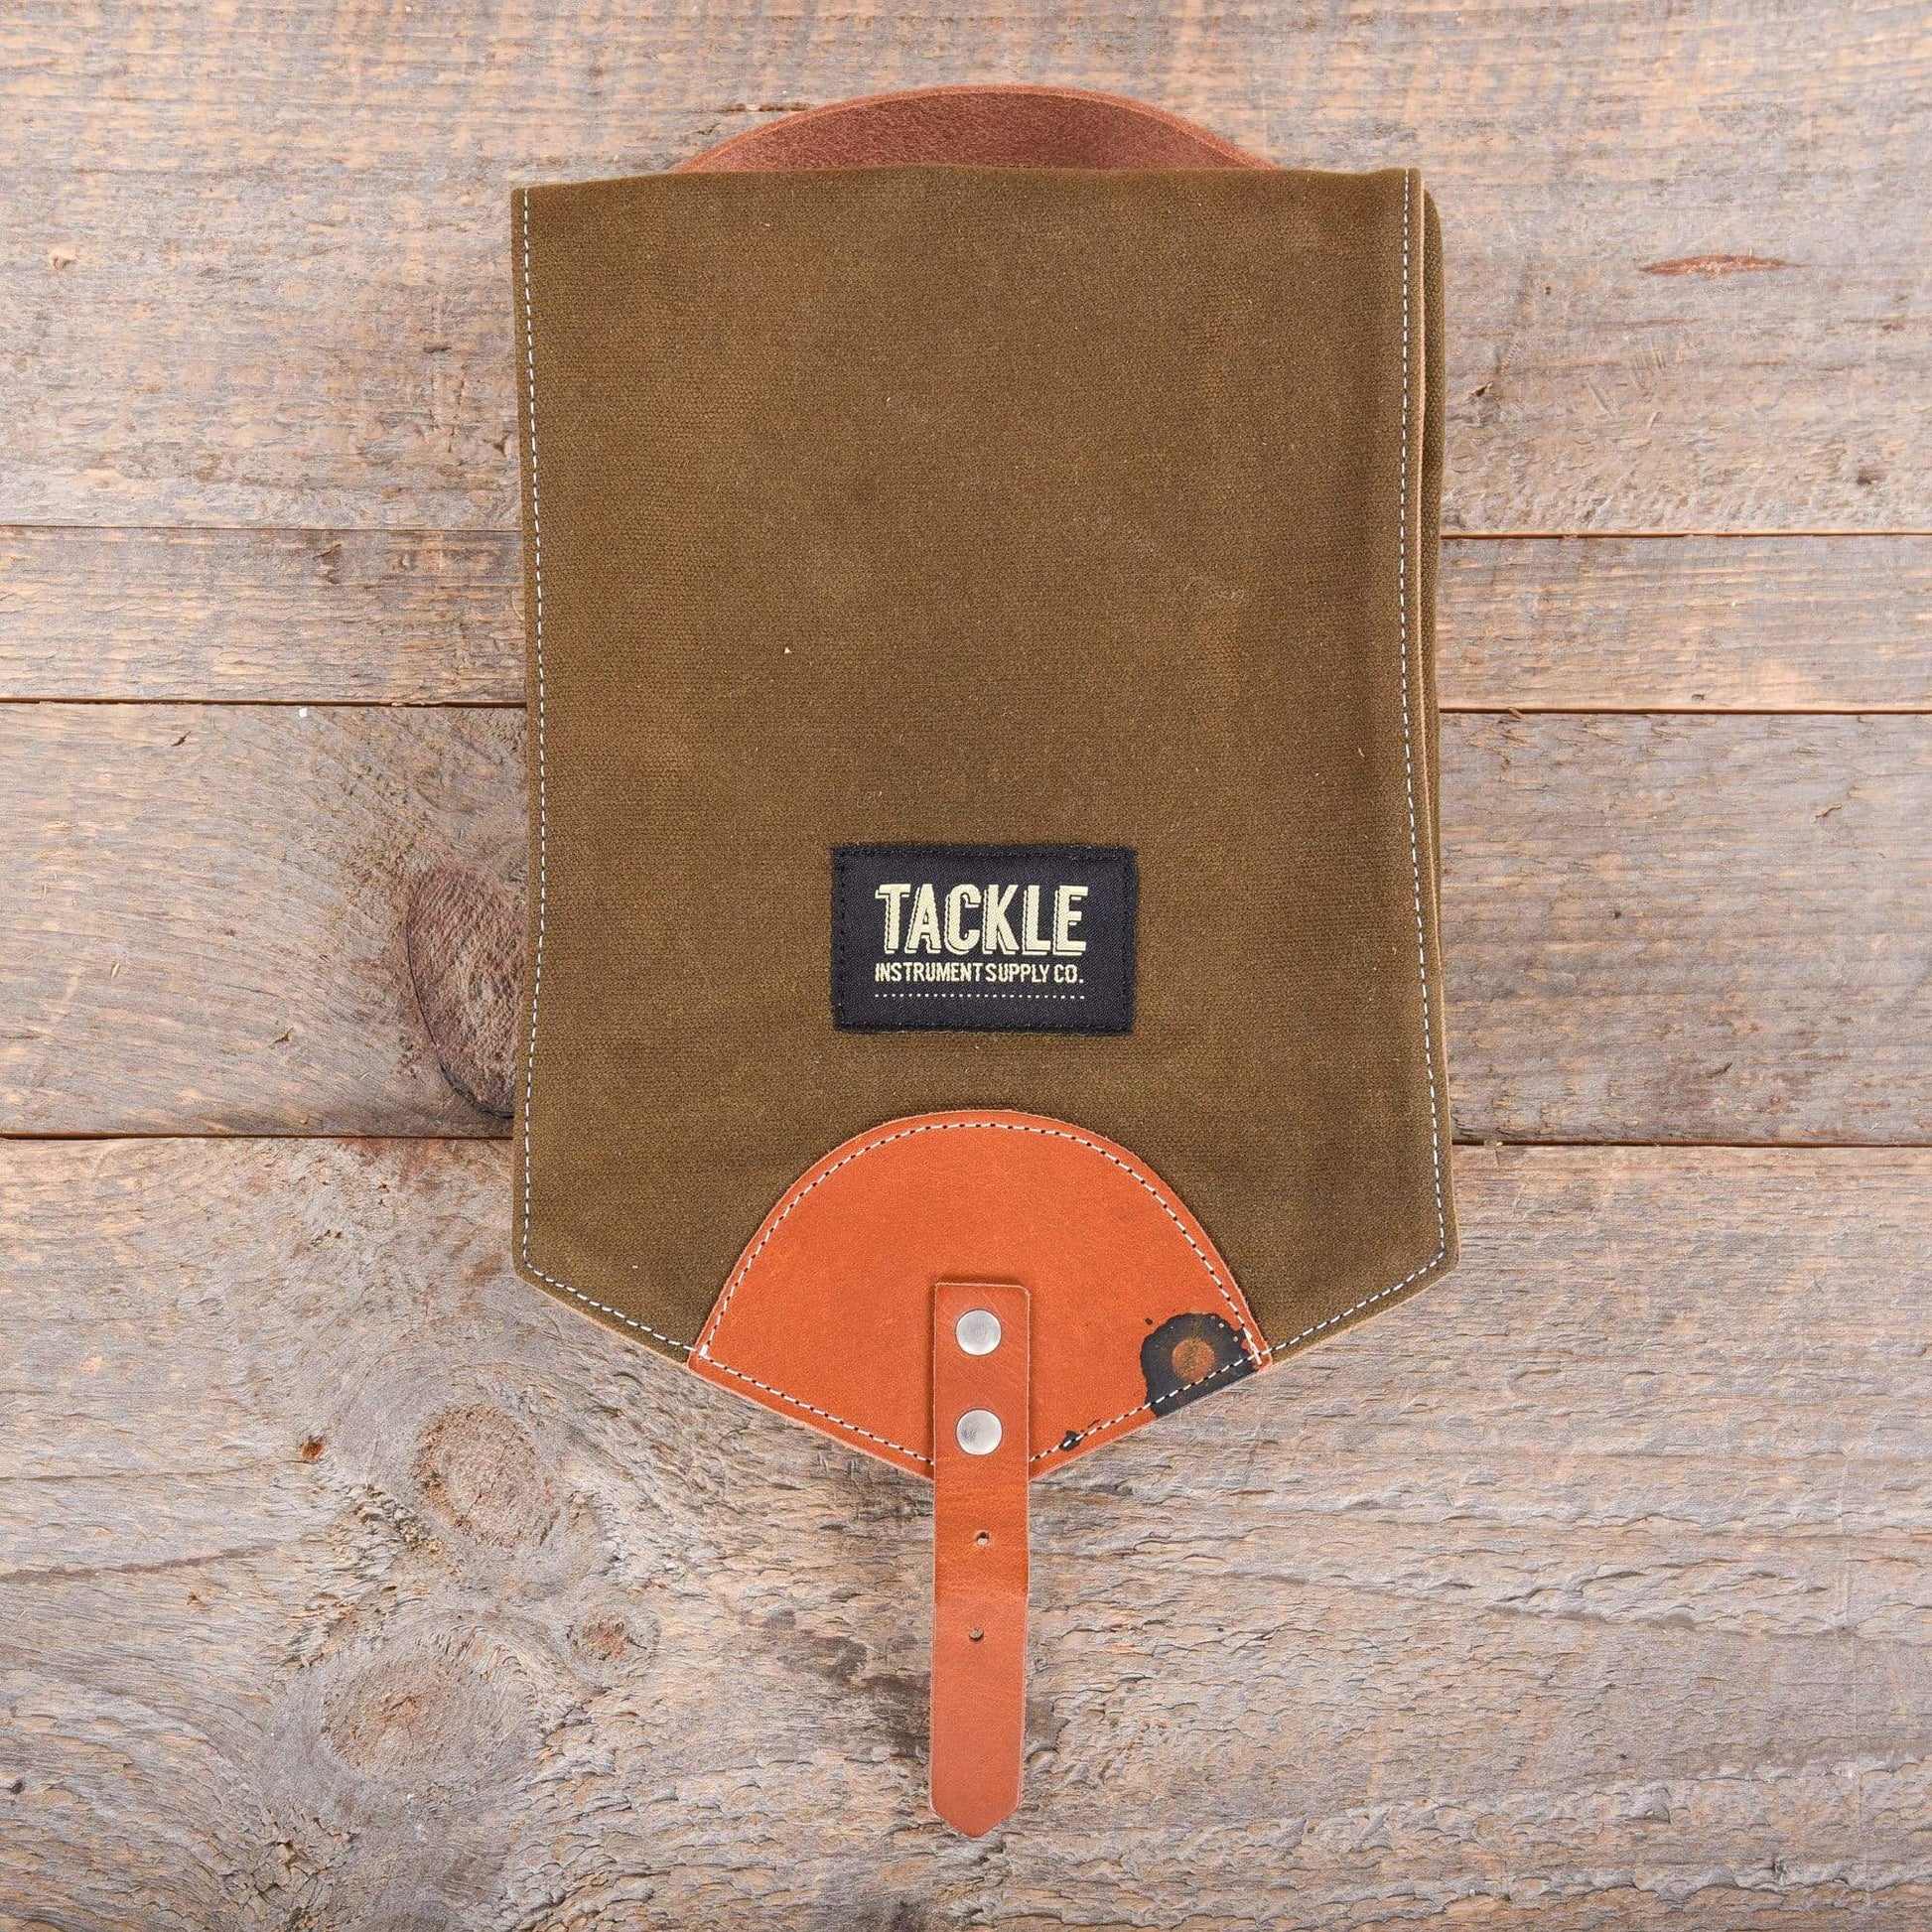 Tackle Waxed Compact Stick Bag Green Drums and Percussion / Parts and Accessories / Cases and Bags